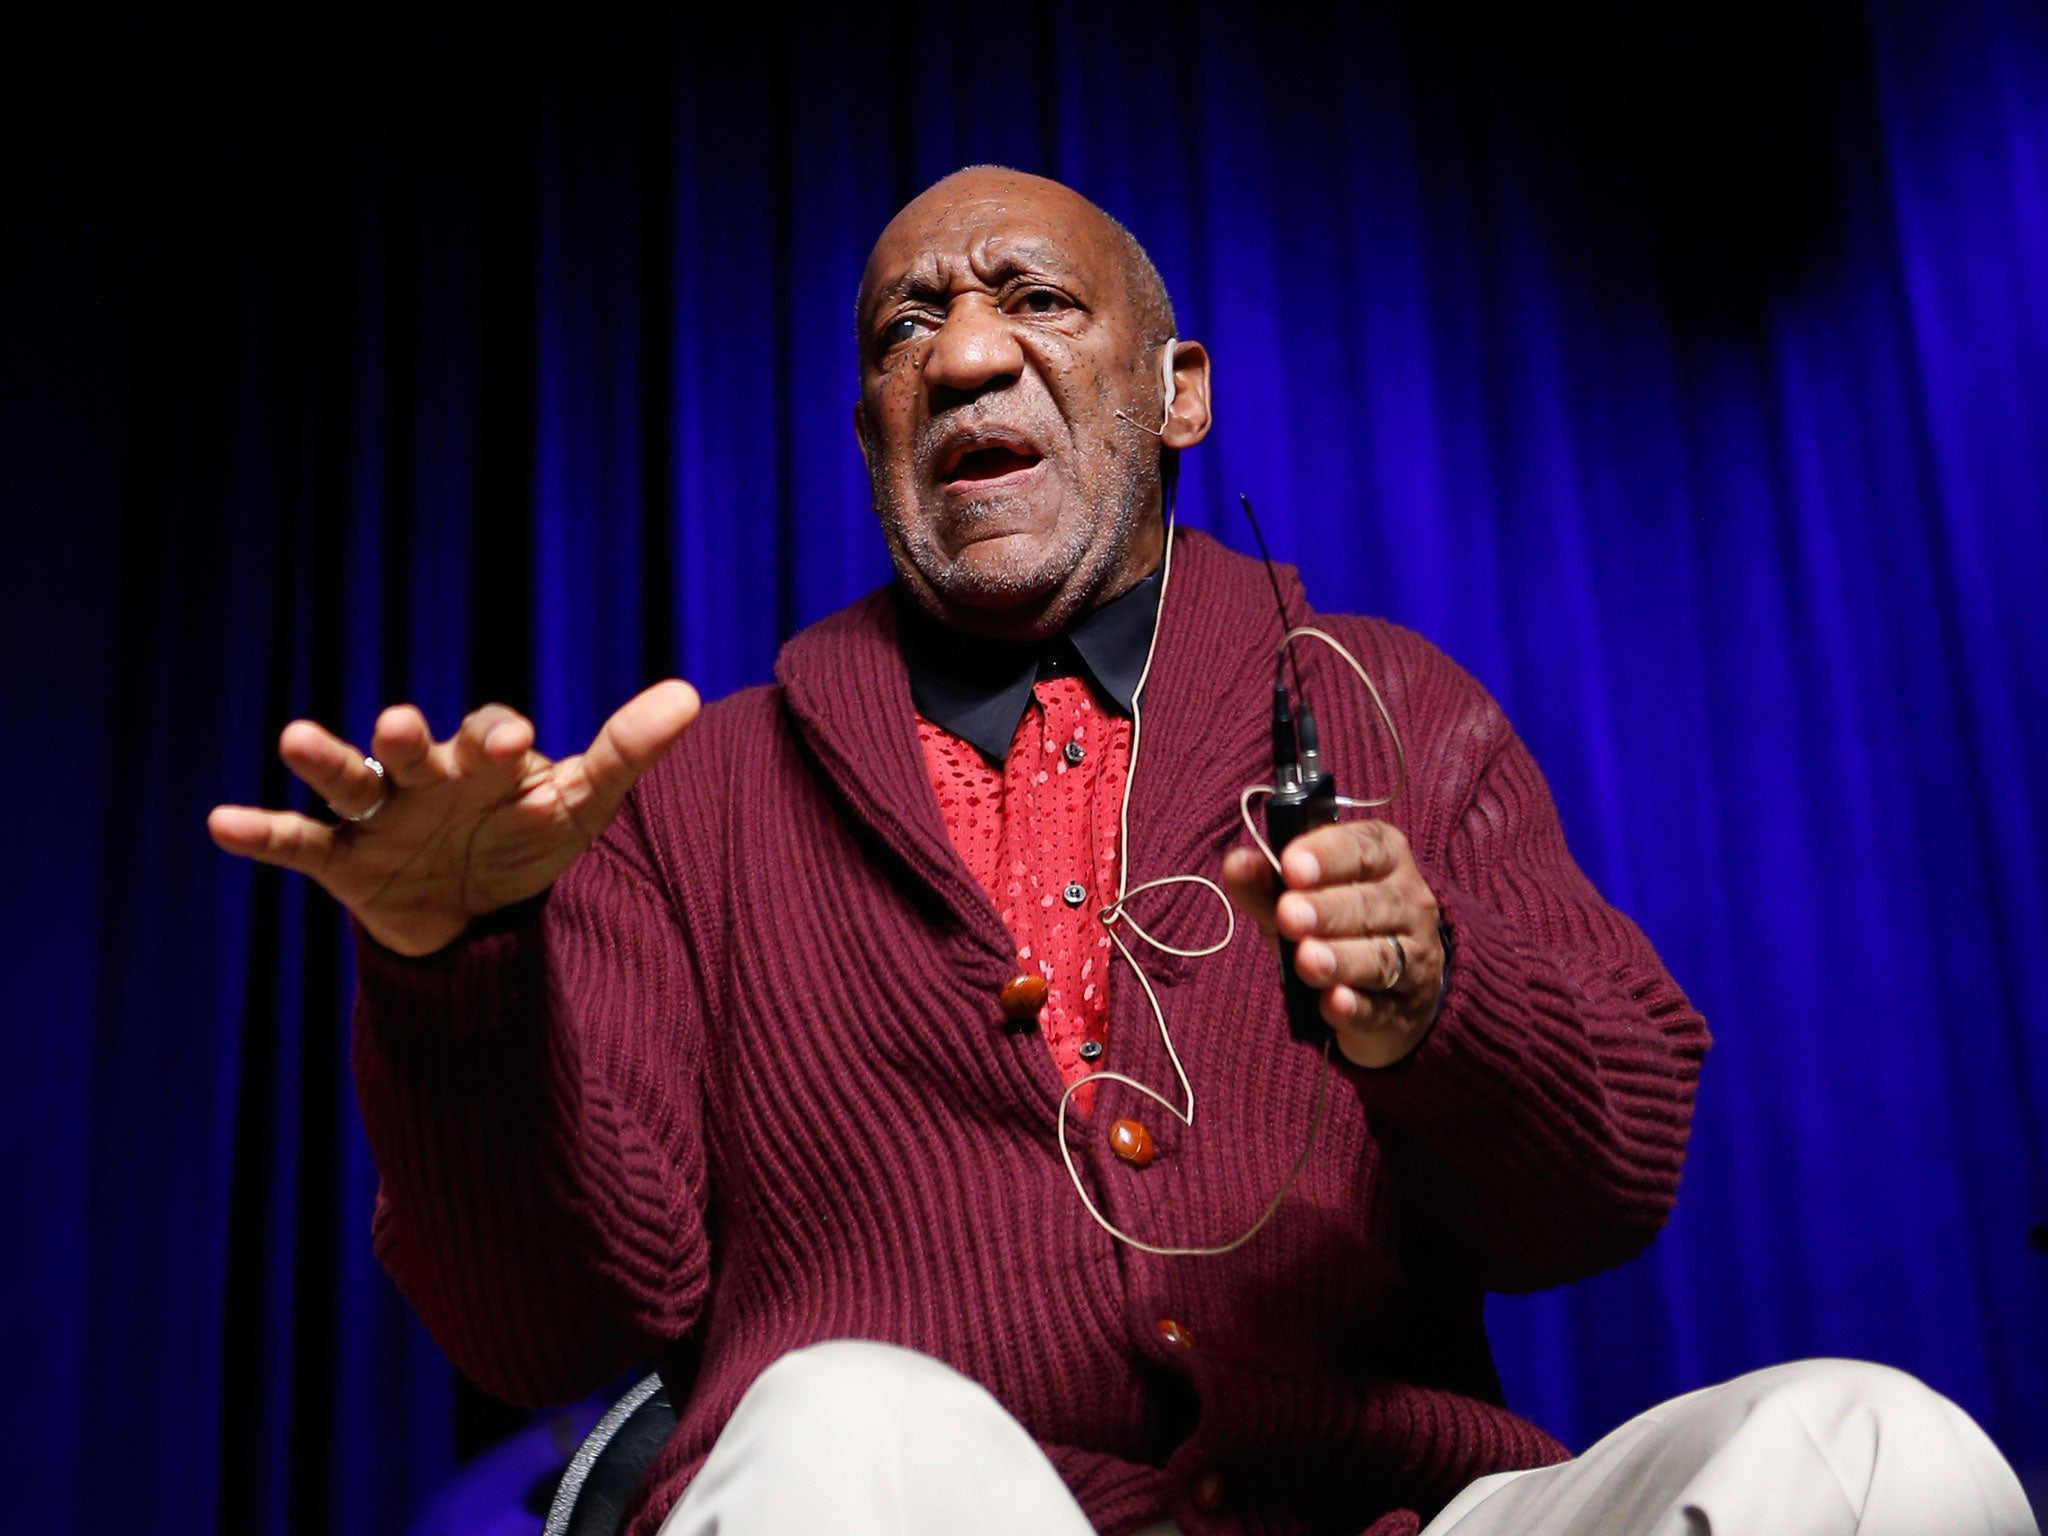 Bill Cosby performs at the 7th annual 'Stand Up For Heroes' event at Madison Square Garden on November 6, 2013 in New York City.